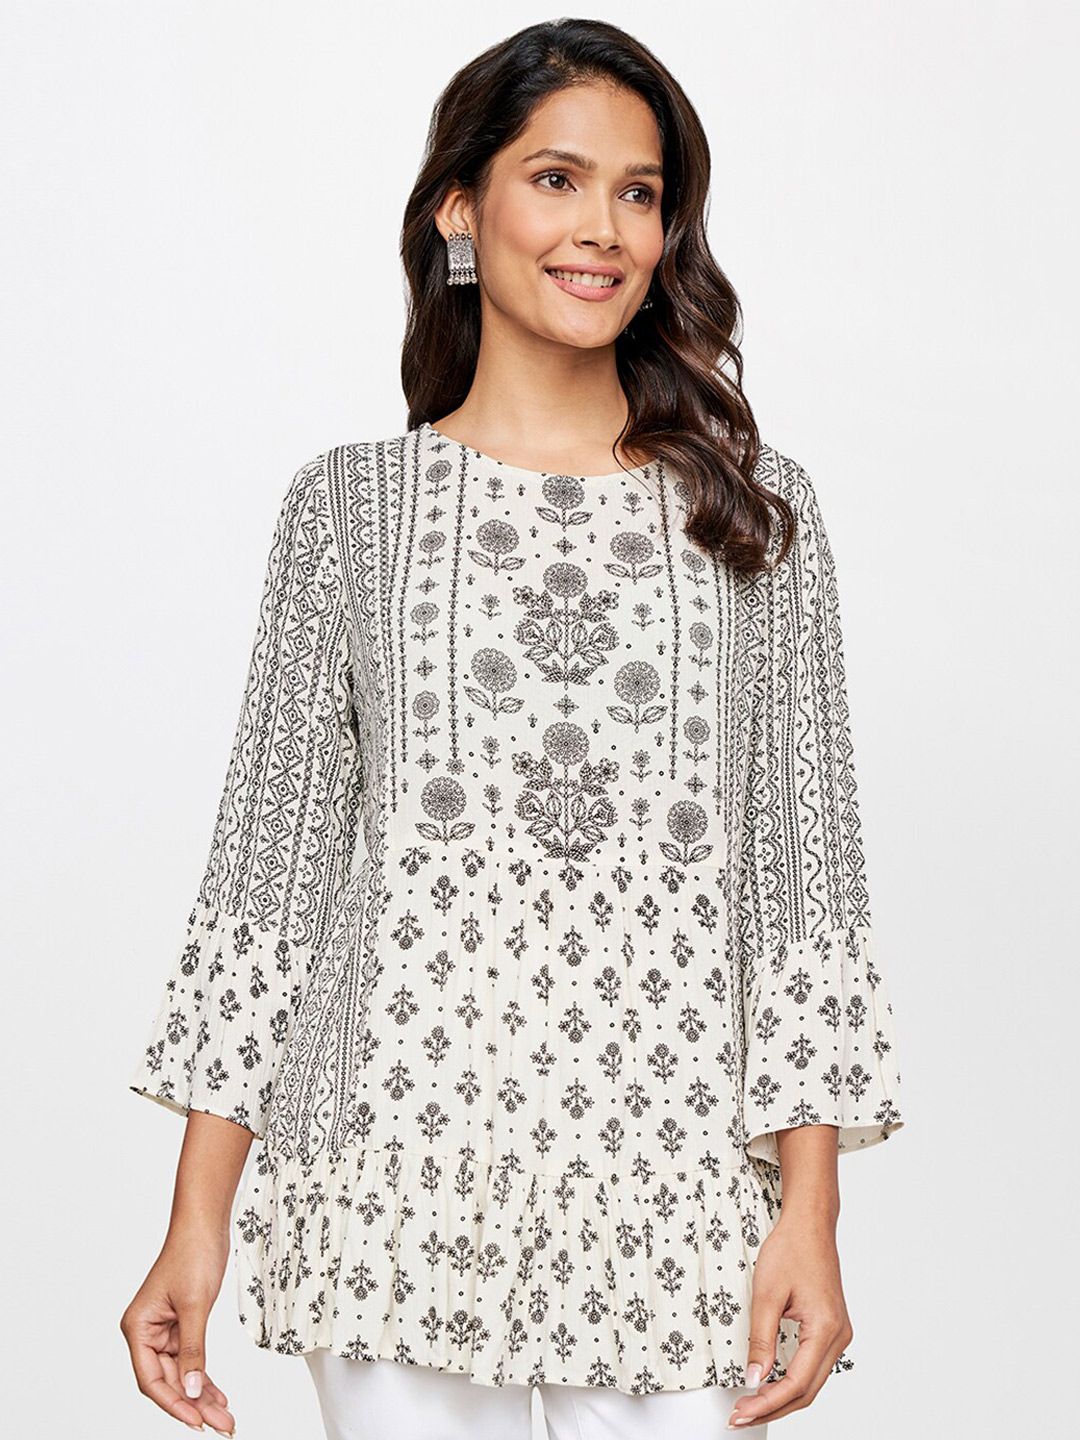 itse White & Black Ethnic Motifs Print Flared Sleeves Viscose Rayon Top Price in India